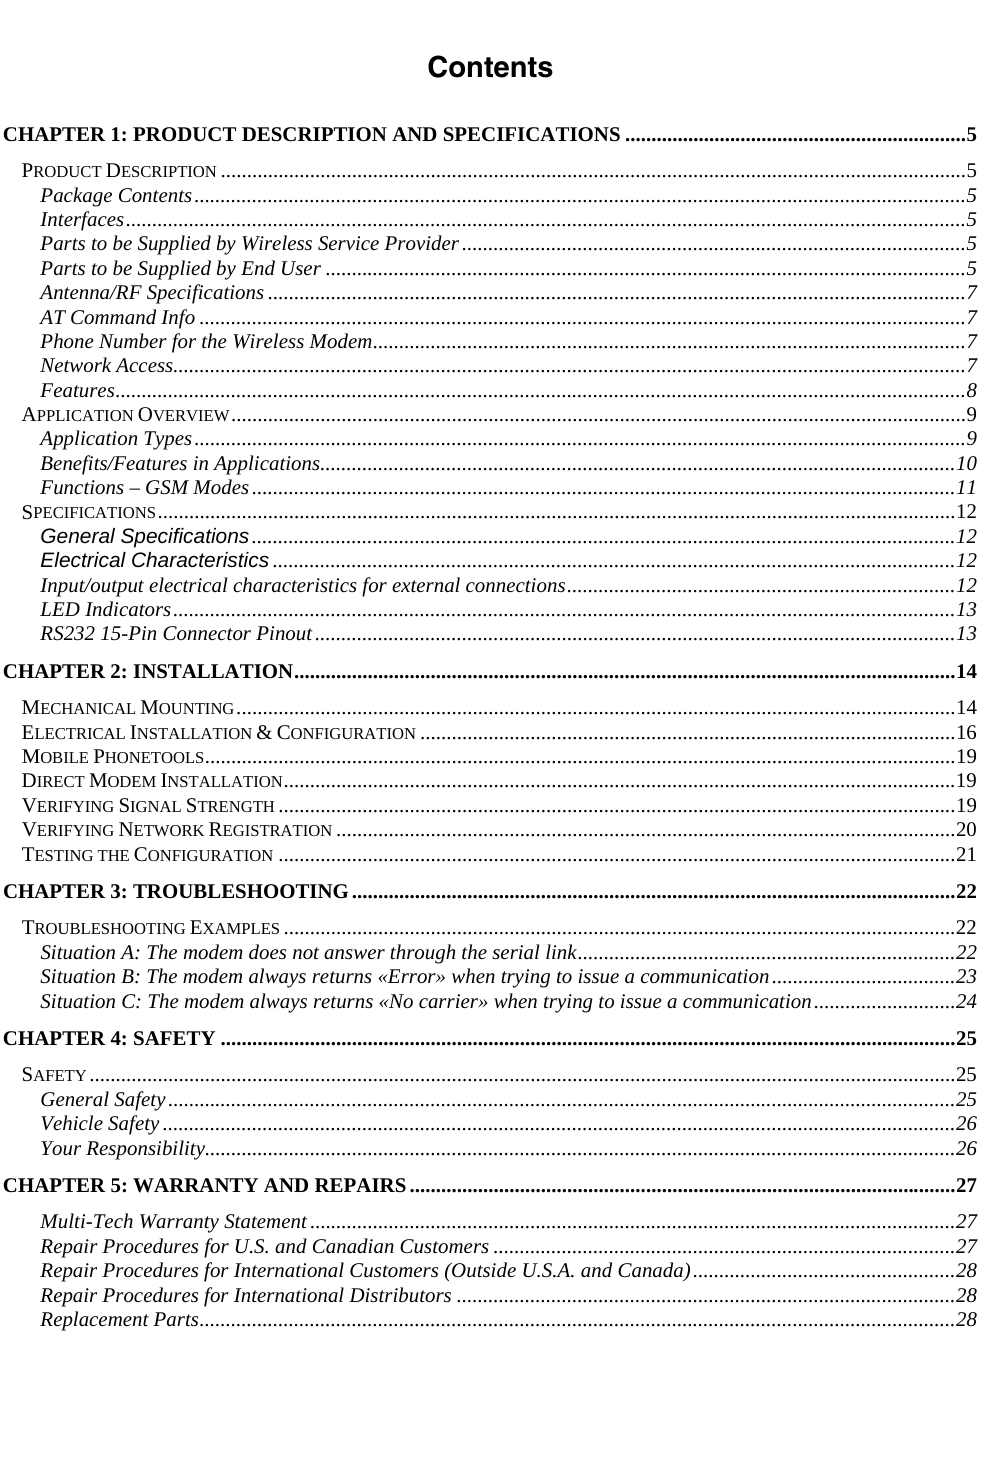                    Contents  CHAPTER 1: PRODUCT DESCRIPTION AND SPECIFICATIONS .................................................................5 PRODUCT DESCRIPTION ..............................................................................................................................................5 Package Contents...................................................................................................................................................5 Interfaces................................................................................................................................................................5 Parts to be Supplied by Wireless Service Provider................................................................................................5 Parts to be Supplied by End User ..........................................................................................................................5 Antenna/RF Specifications .....................................................................................................................................7 AT Command Info ..................................................................................................................................................7 Phone Number for the Wireless Modem.................................................................................................................7 Network Access.......................................................................................................................................................7 Features..................................................................................................................................................................8 APPLICATION OVERVIEW............................................................................................................................................9 Application Types...................................................................................................................................................9 Benefits/Features in Applications.........................................................................................................................10 Functions – GSM Modes......................................................................................................................................11 SPECIFICATIONS........................................................................................................................................................12 General Specifications......................................................................................................................................12 Electrical Characteristics ..................................................................................................................................12 Input/output electrical characteristics for external connections..........................................................................12 LED Indicators.....................................................................................................................................................13 RS232 15-Pin Connector Pinout..........................................................................................................................13 CHAPTER 2: INSTALLATION..............................................................................................................................14 MECHANICAL MOUNTING.........................................................................................................................................14 ELECTRICAL INSTALLATION &amp; CONFIGURATION ......................................................................................................16 MOBILE PHONETOOLS...............................................................................................................................................19 DIRECT MODEM INSTALLATION................................................................................................................................19 VERIFYING SIGNAL STRENGTH .................................................................................................................................19 VERIFYING NETWORK REGISTRATION ......................................................................................................................20 TESTING THE CONFIGURATION .................................................................................................................................21 CHAPTER 3: TROUBLESHOOTING...................................................................................................................22 TROUBLESHOOTING EXAMPLES ................................................................................................................................22 Situation A: The modem does not answer through the serial link........................................................................22 Situation B: The modem always returns «Error» when trying to issue a communication...................................23 Situation C: The modem always returns «No carrier» when trying to issue a communication...........................24 CHAPTER 4: SAFETY ............................................................................................................................................25 SAFETY.....................................................................................................................................................................25 General Safety......................................................................................................................................................25 Vehicle Safety .......................................................................................................................................................26 Your Responsibility...............................................................................................................................................26 CHAPTER 5: WARRANTY AND REPAIRS........................................................................................................27 Multi-Tech Warranty Statement ...........................................................................................................................27 Repair Procedures for U.S. and Canadian Customers ........................................................................................27 Repair Procedures for International Customers (Outside U.S.A. and Canada)..................................................28 Repair Procedures for International Distributors ...............................................................................................28 Replacement Parts................................................................................................................................................28      